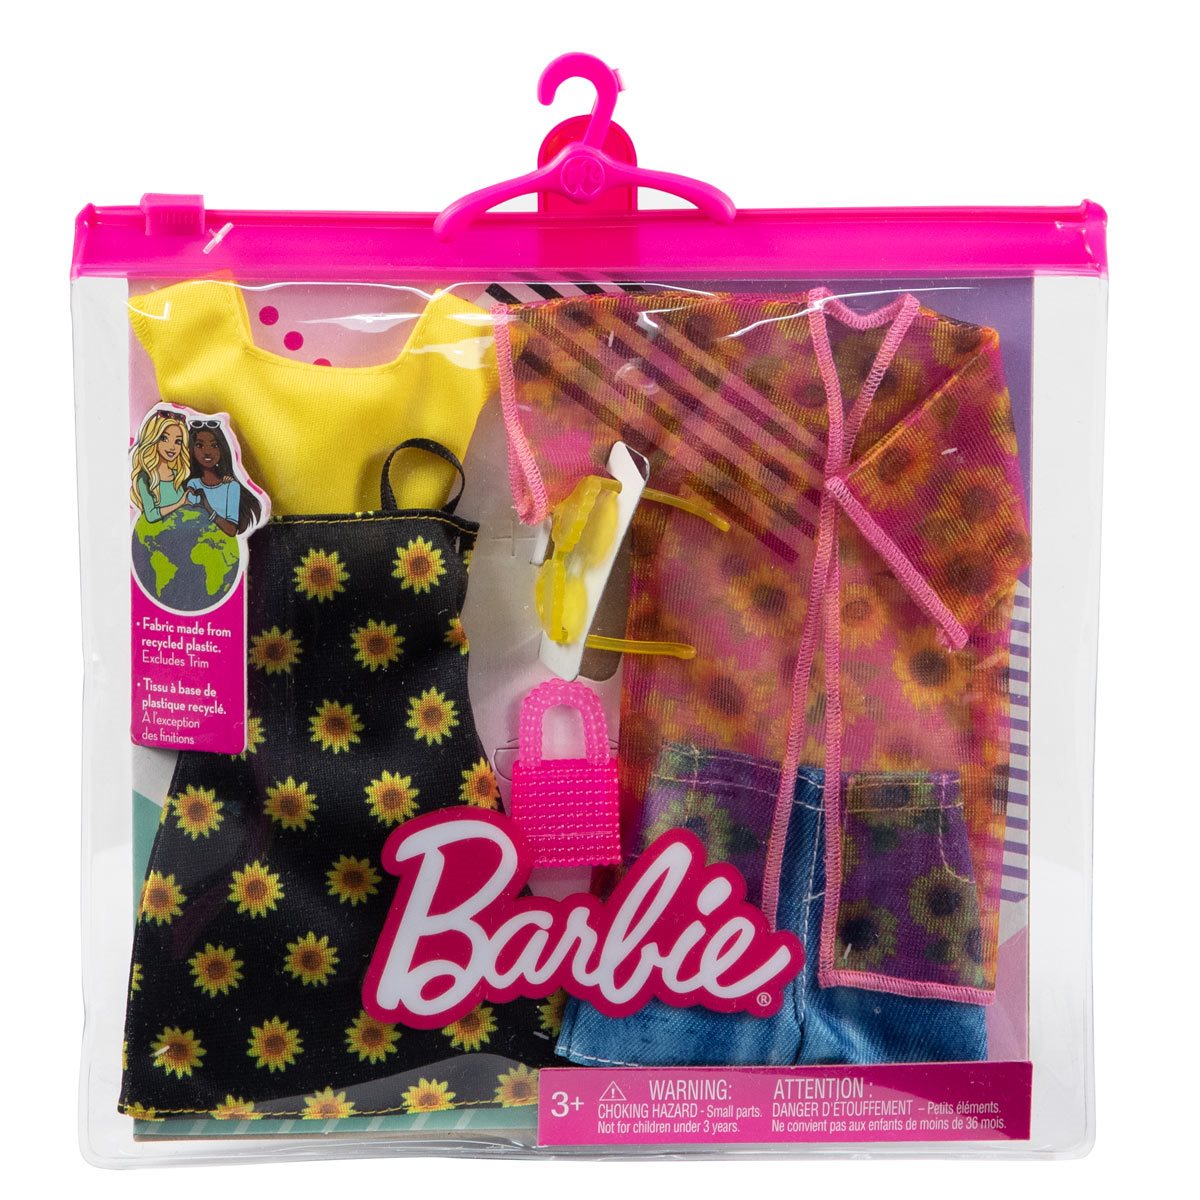 Barbie Clothes, Floral-Themed Fashion and Accessory 2-Pack for Barbie Dolls